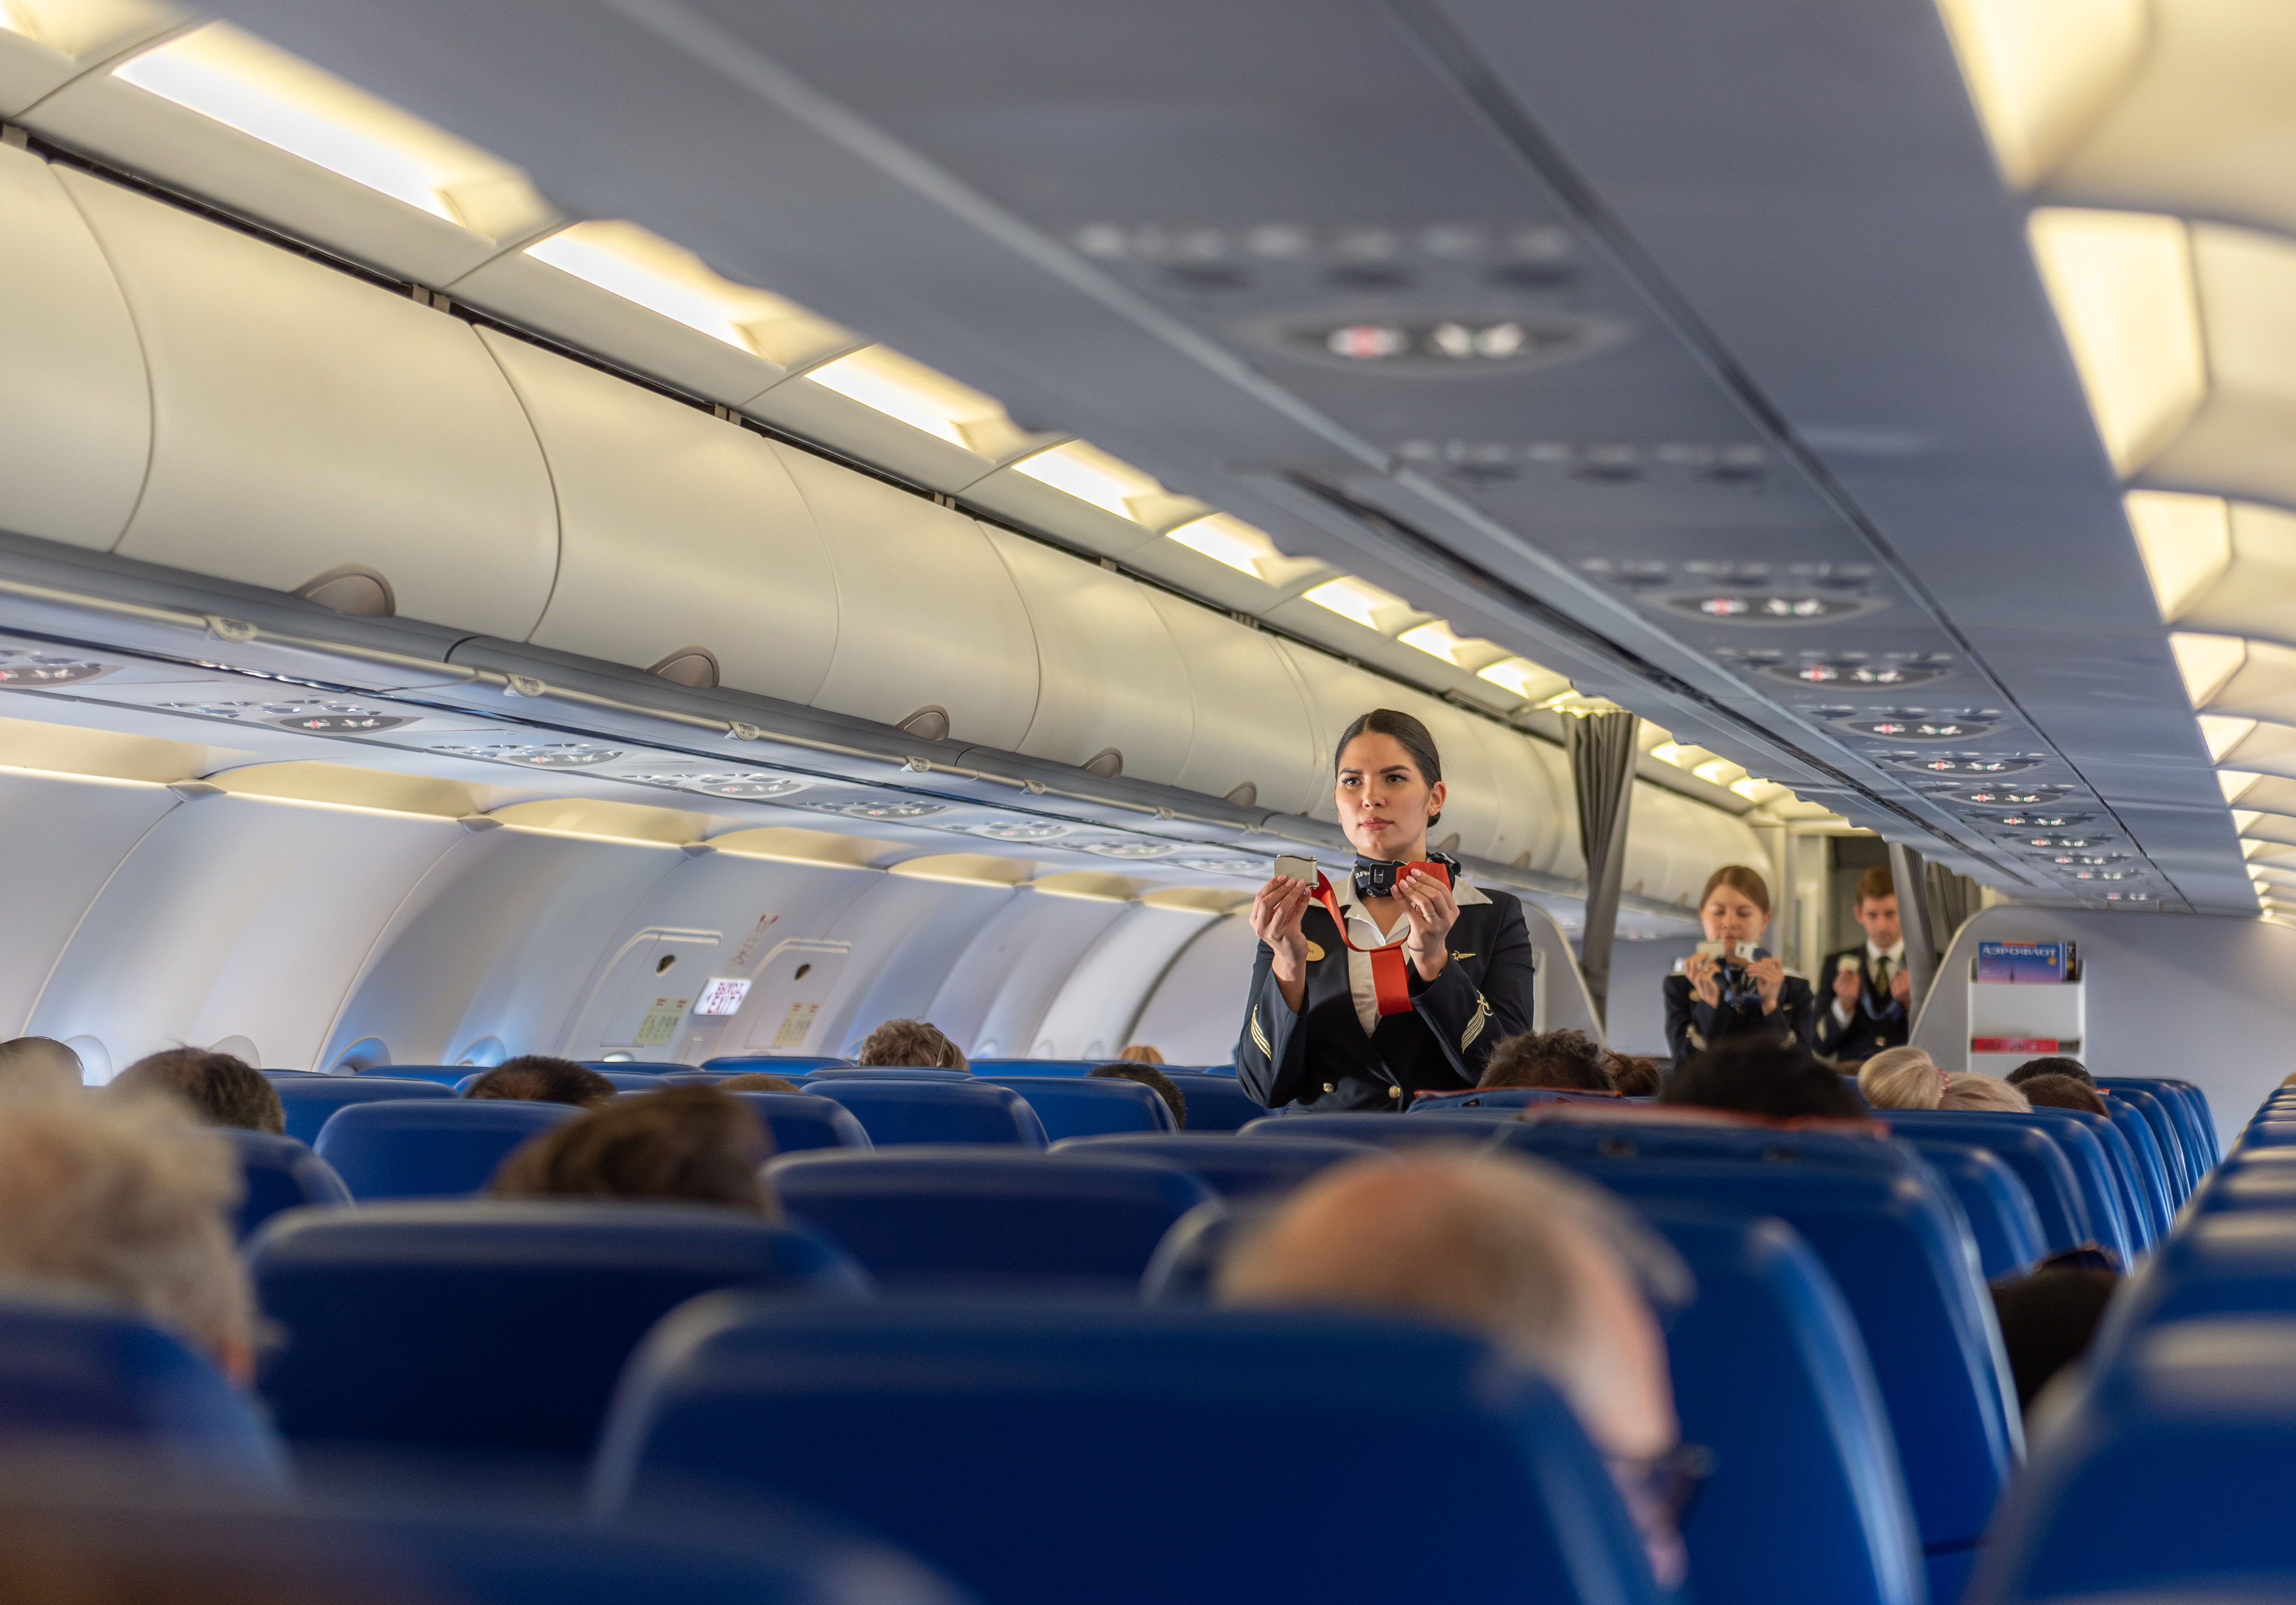 Rome, Italy - October 23, 2019: Aeroflot Russian Airlines Cabin Crew Safety Demonstration in airplane before departure.